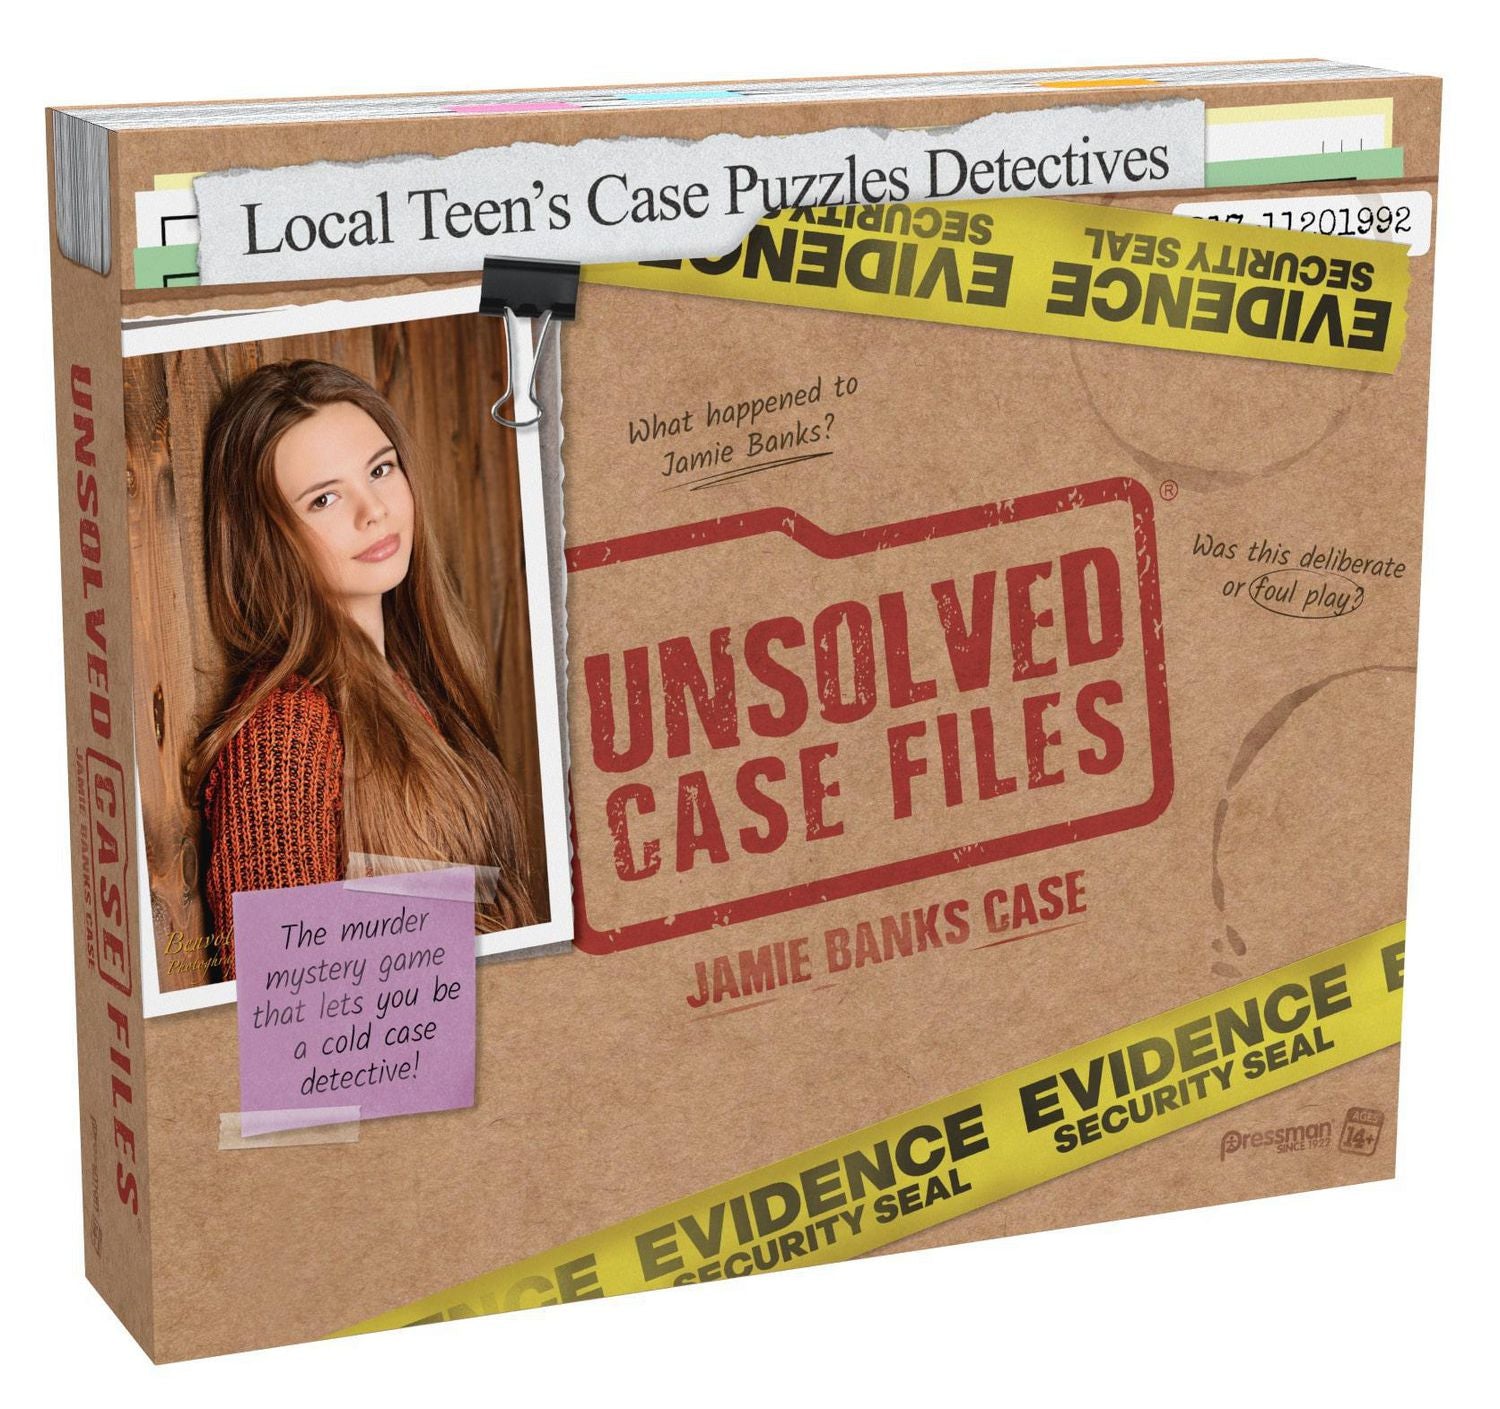 UNSOLVED CASE FILES 2: JAMIE BANKS